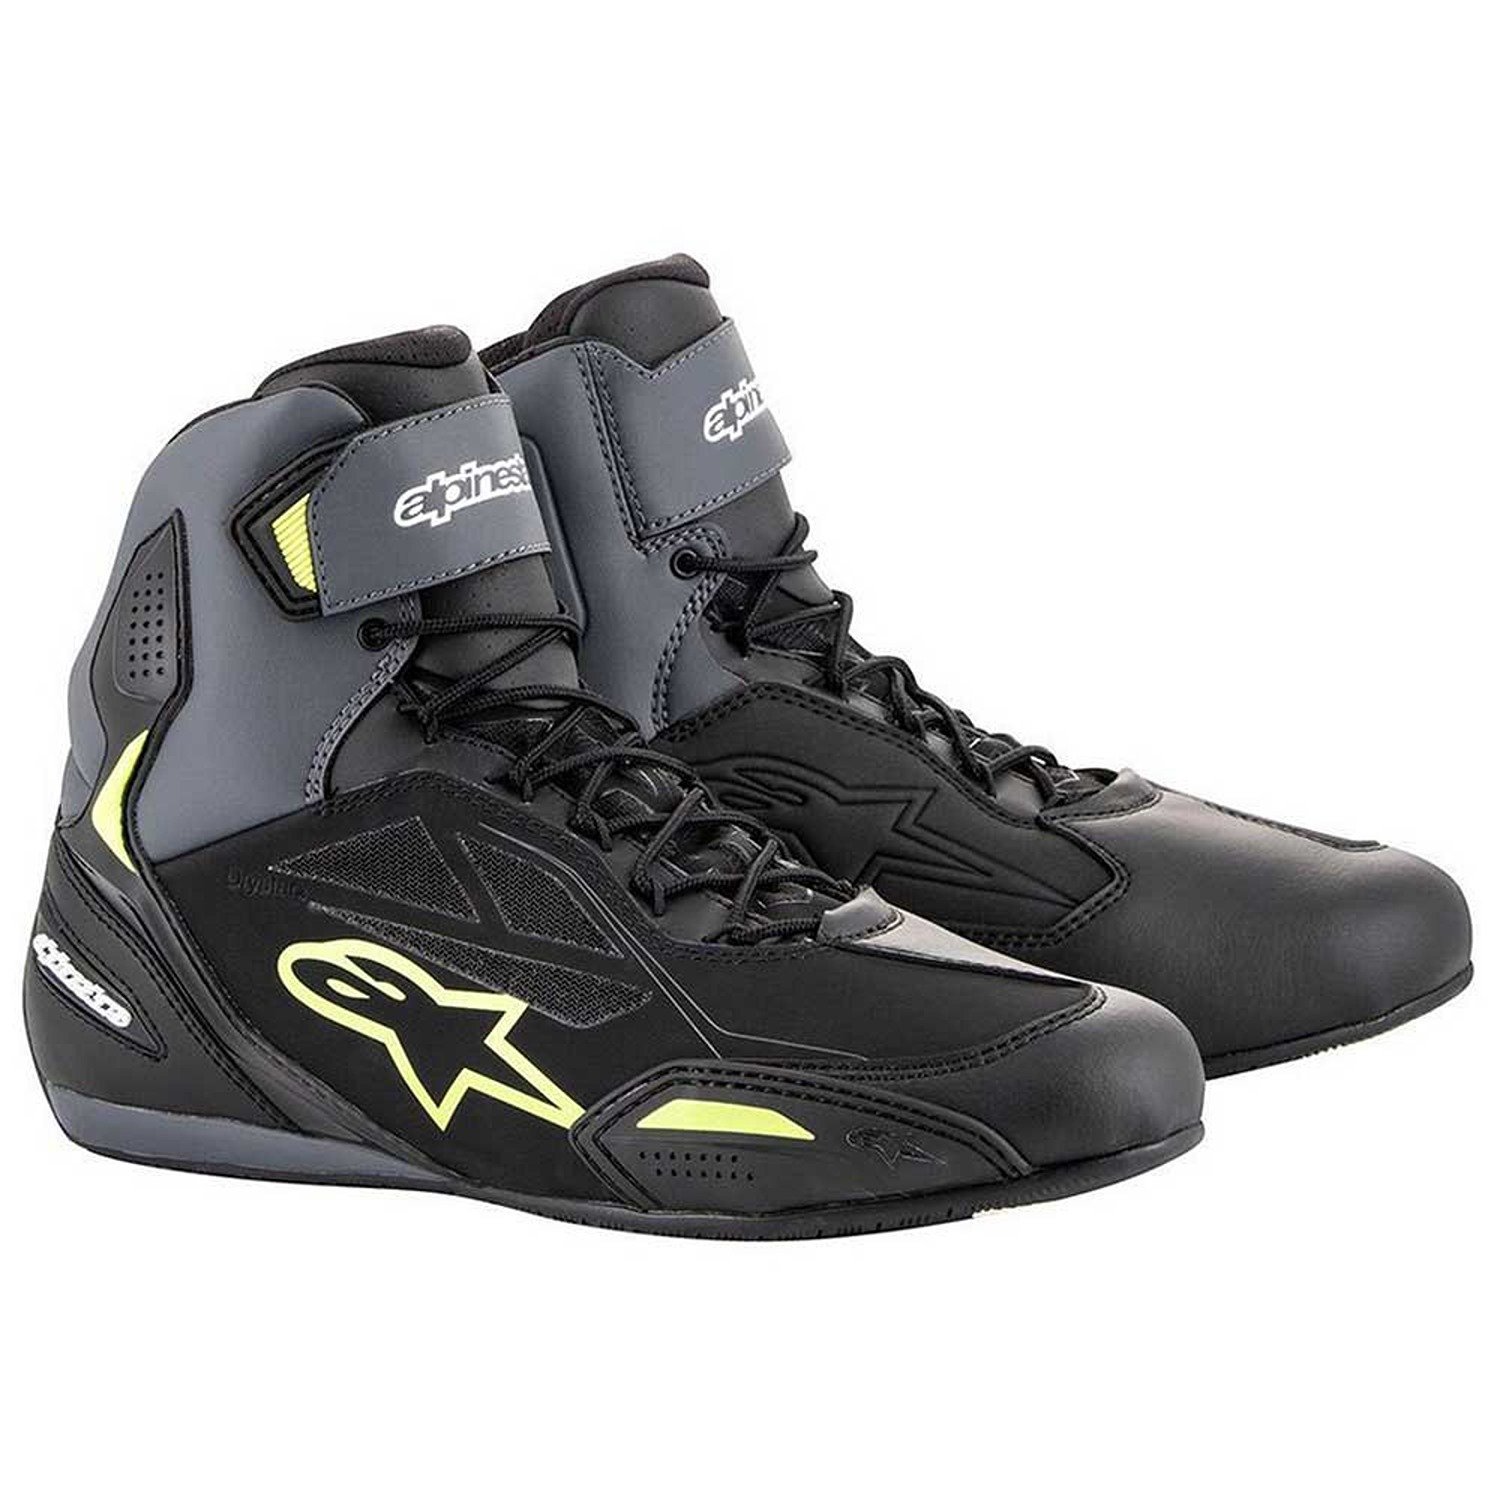 Image of Alpinestars Faster-3 Shoes Black Yellow Fluo Größe US 115